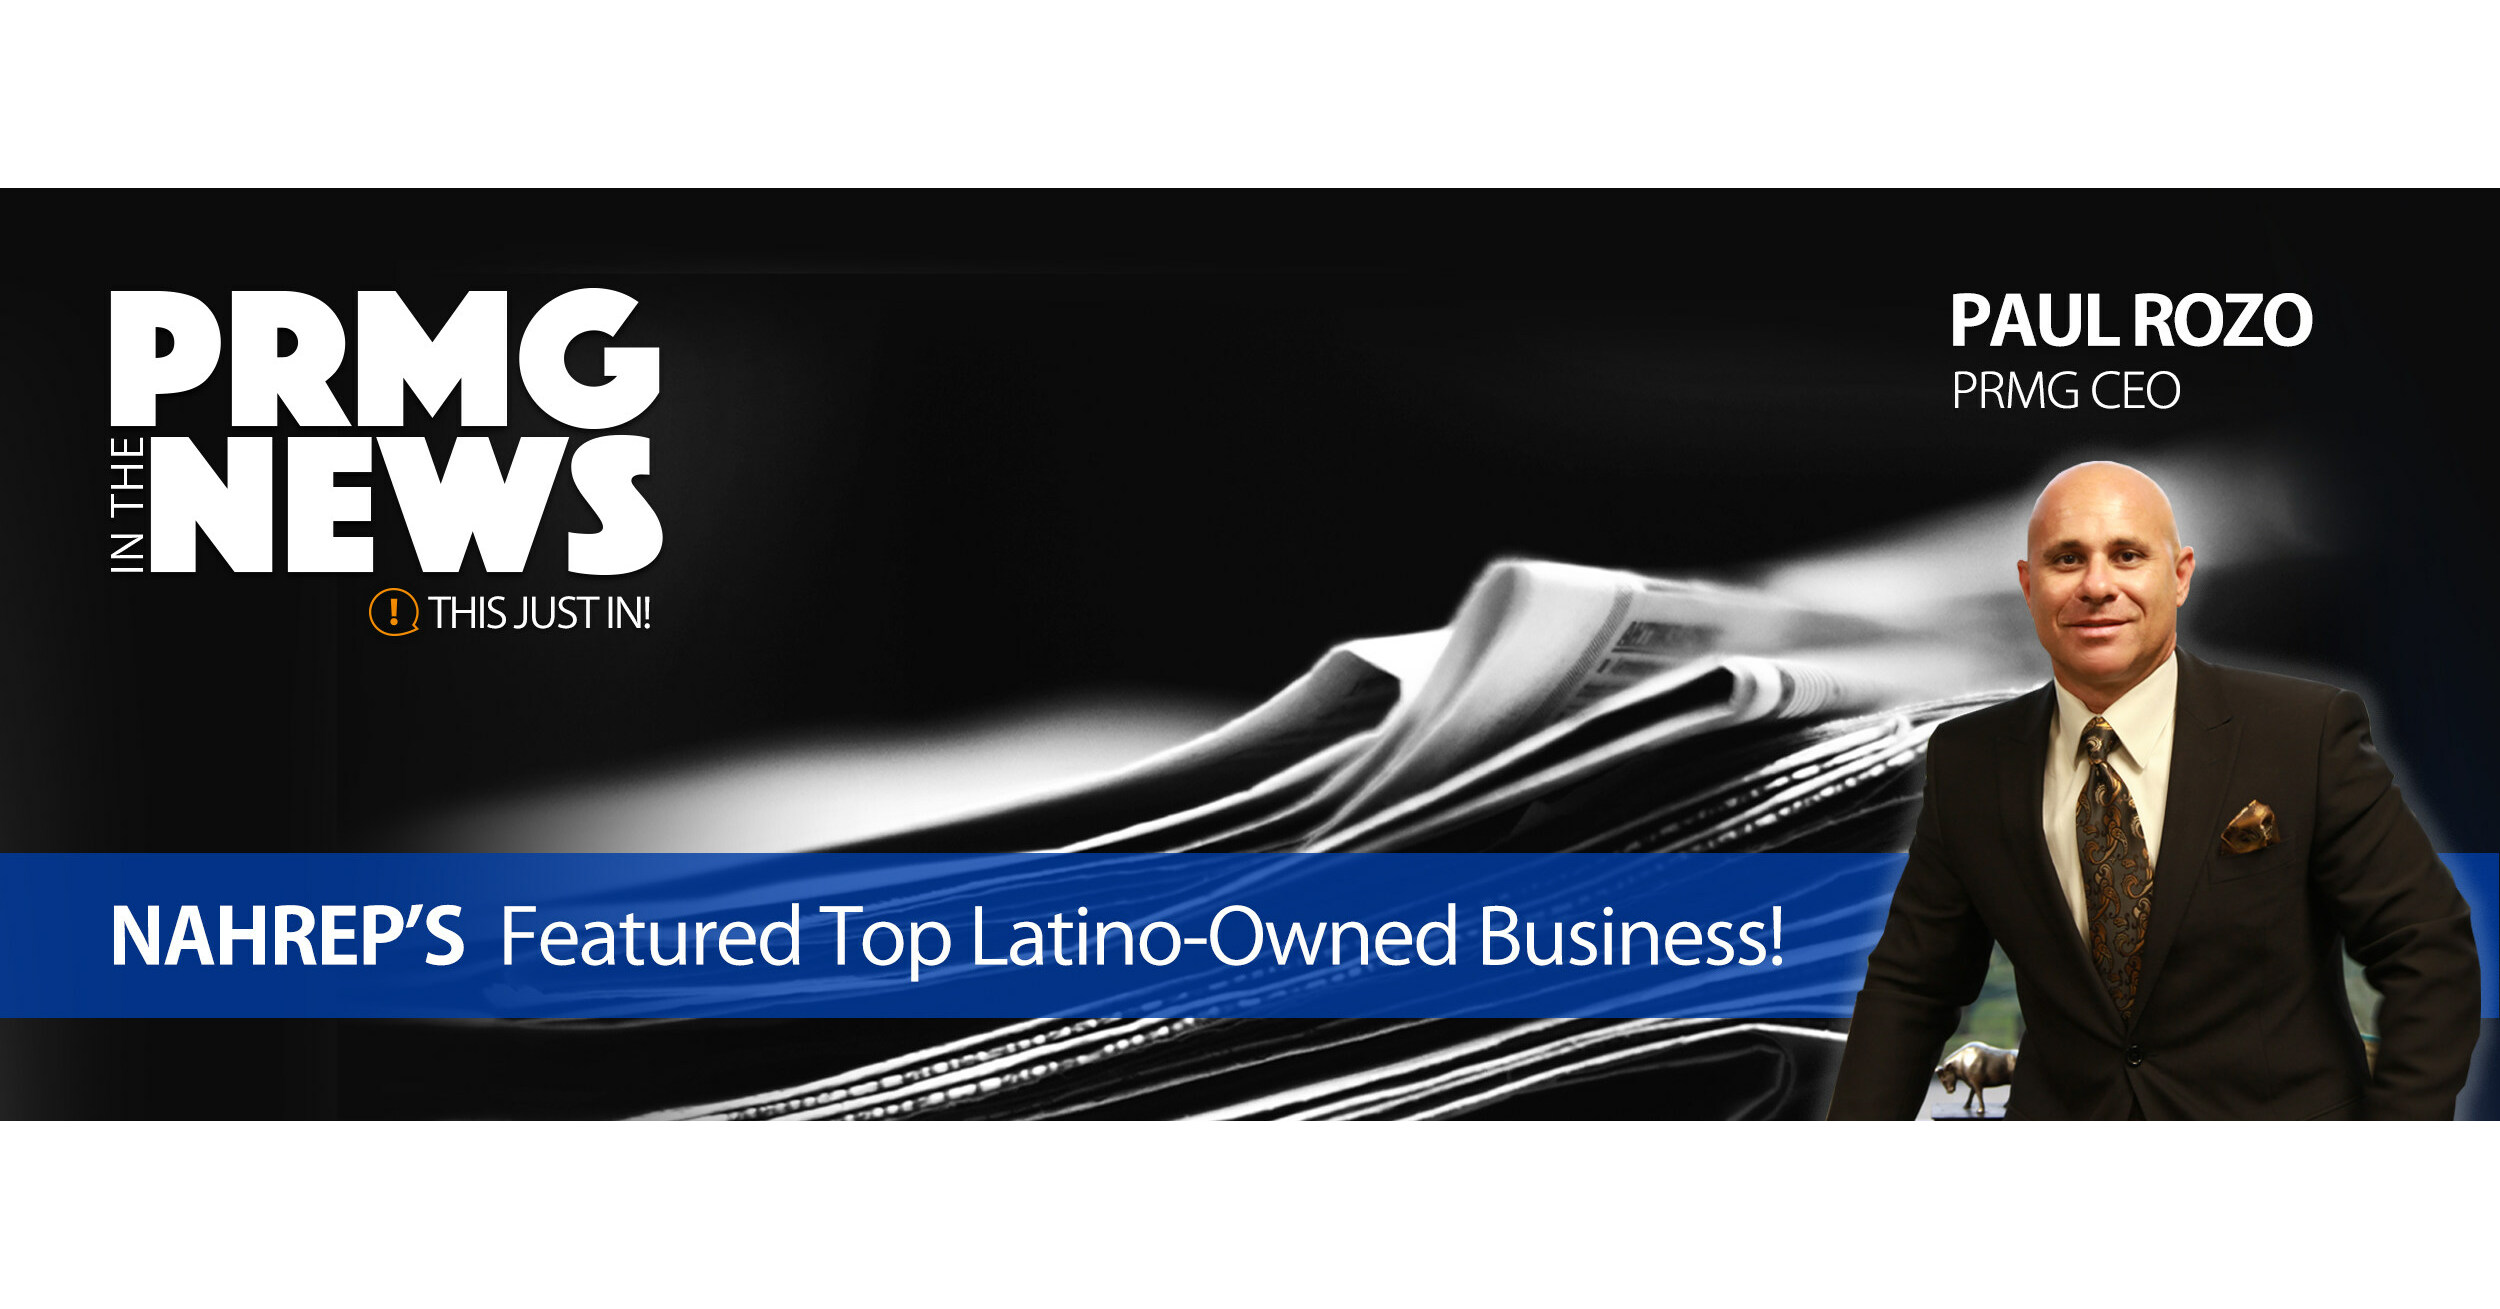 Paul Rozo, PRMG CEO, Featured as NAHREP'S Top Latino-Owned Business!